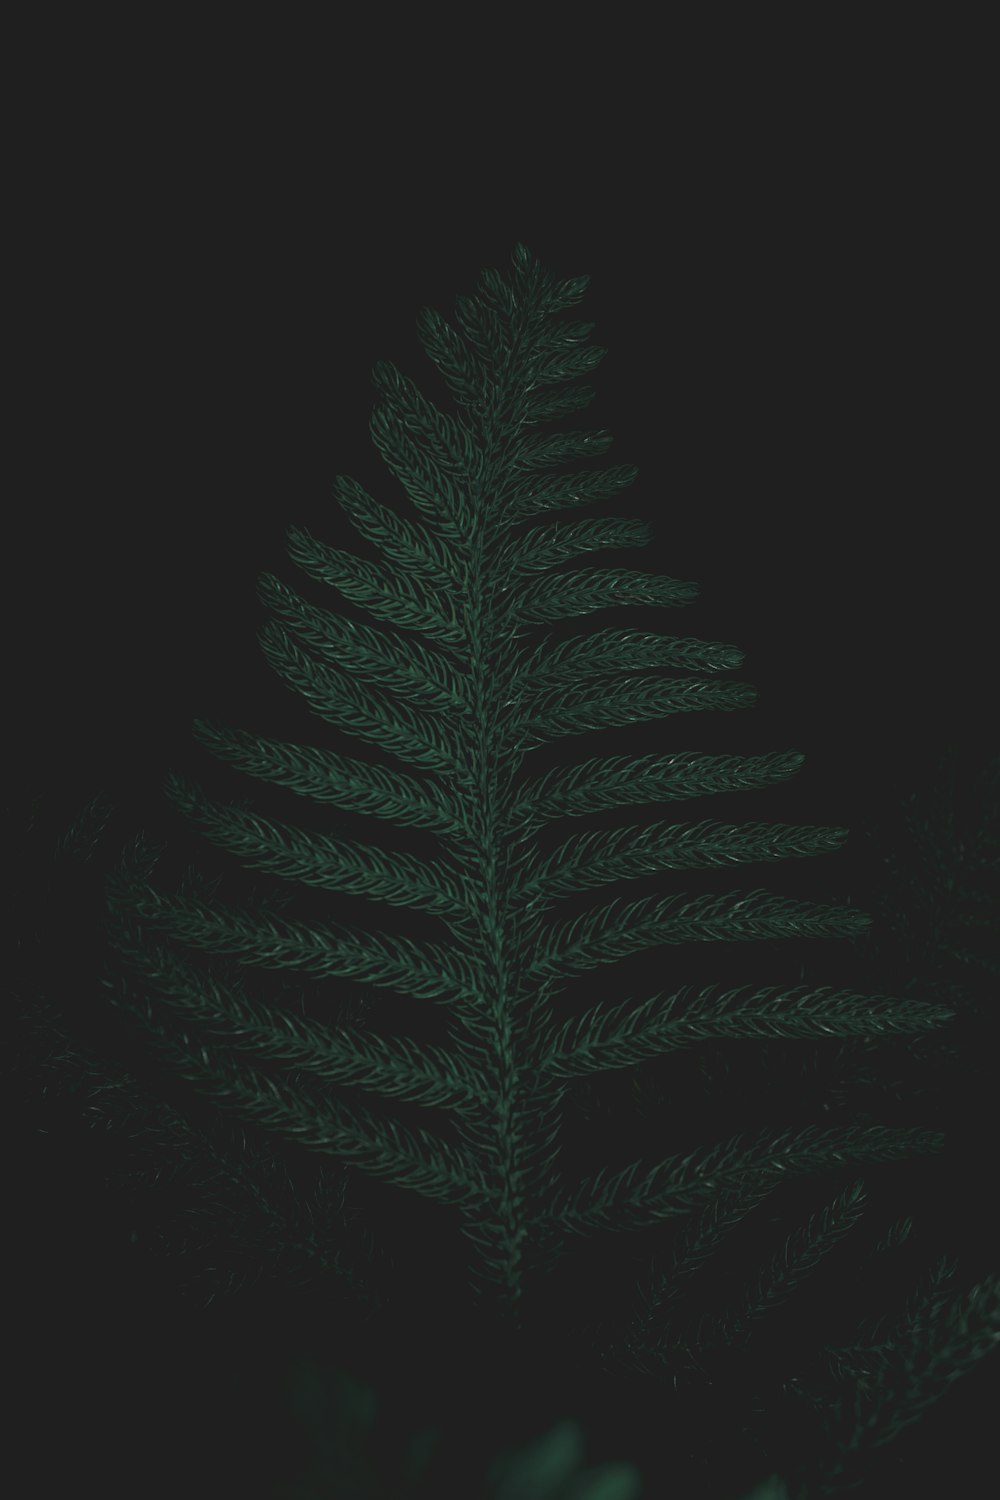 low light photography of green leafed tree